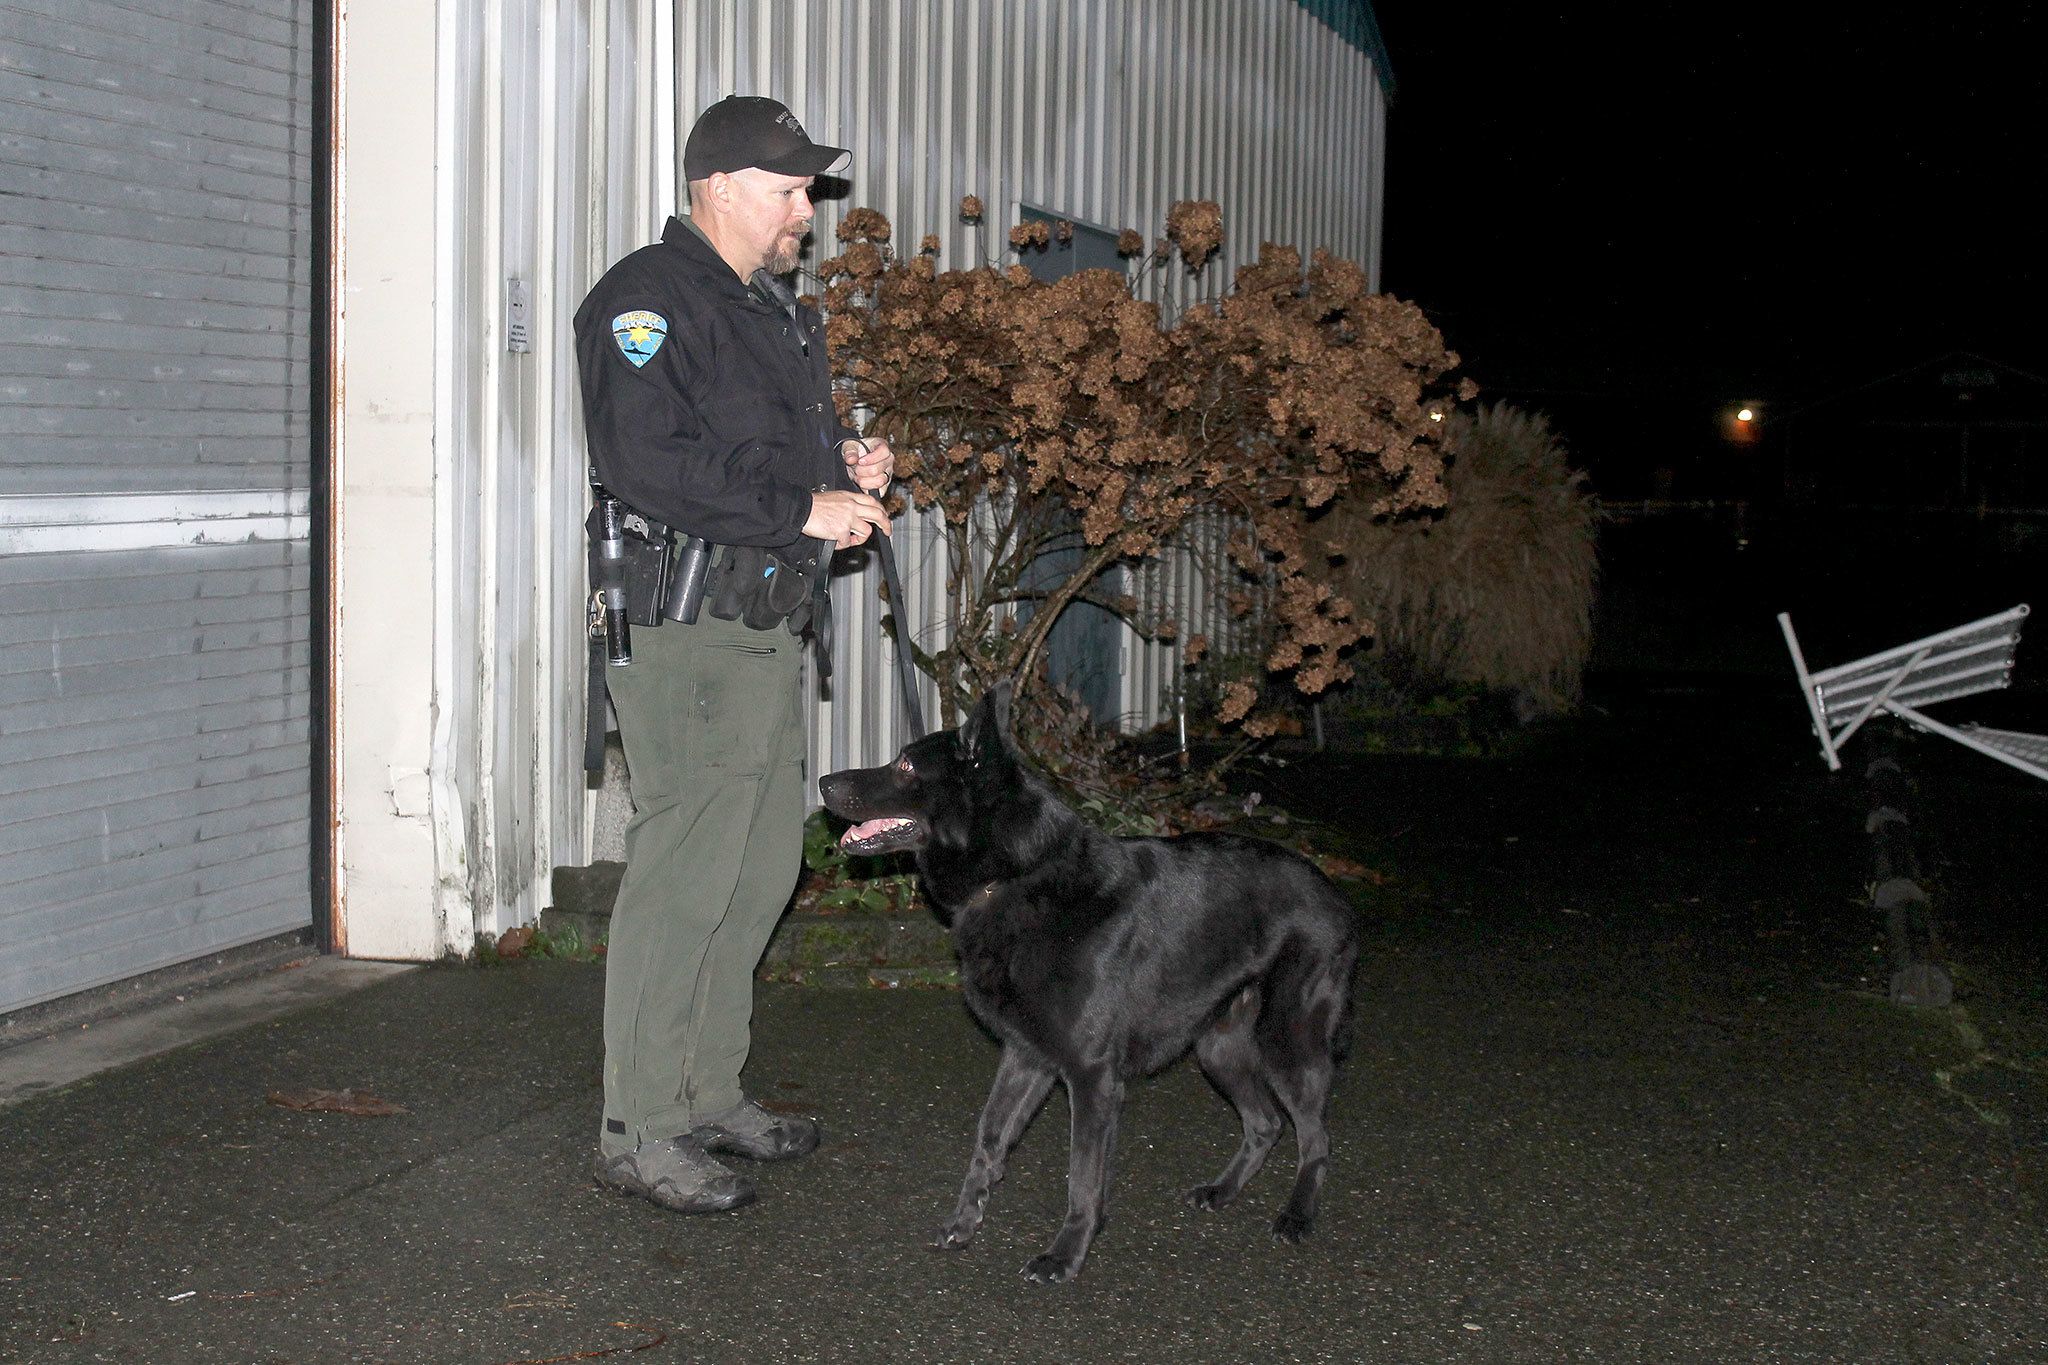 Kitsap County Sheriff’s Deputy Aaron Baker and his K-9 partner Heiko train in obedience, protection and scent work Nov. 15 at the Kitsap County Fairgrounds.                                Michelle Beahm / Kitsap News Group